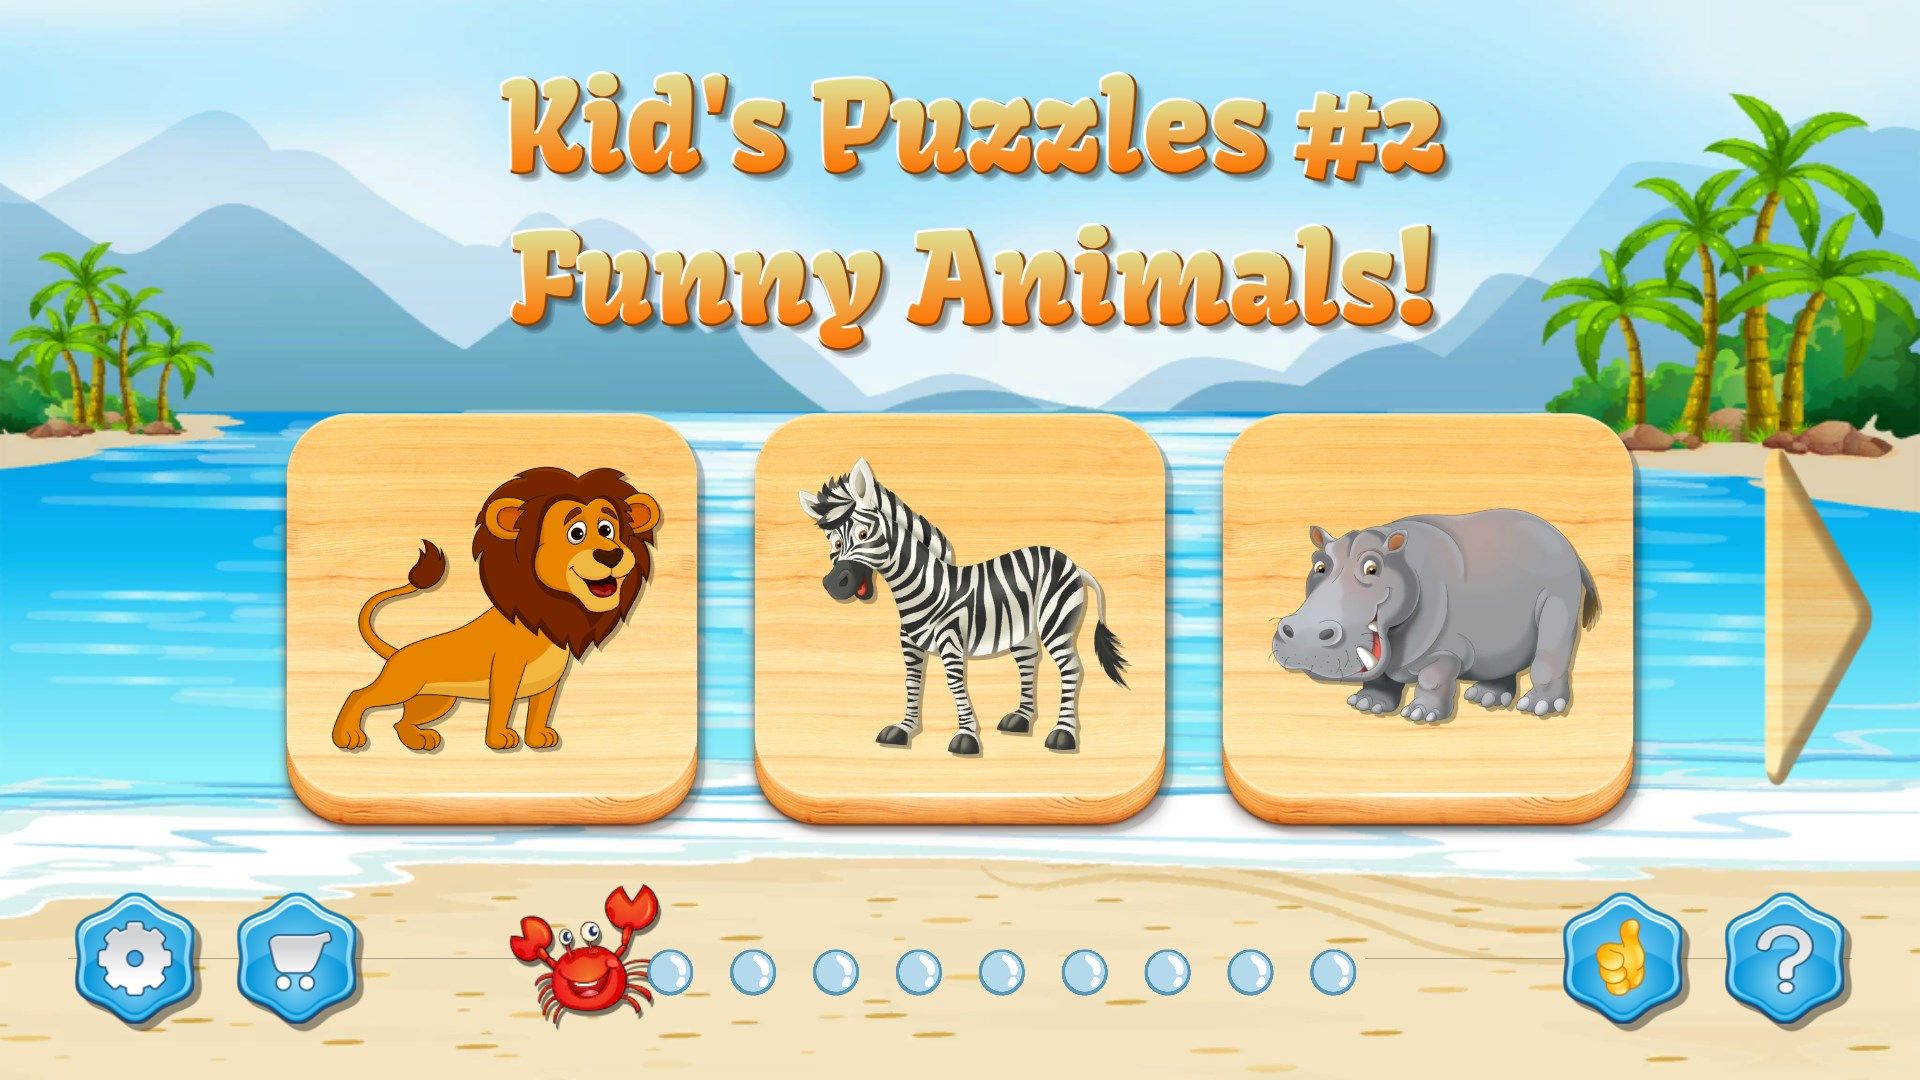 Kids Puzzles with Animals #2